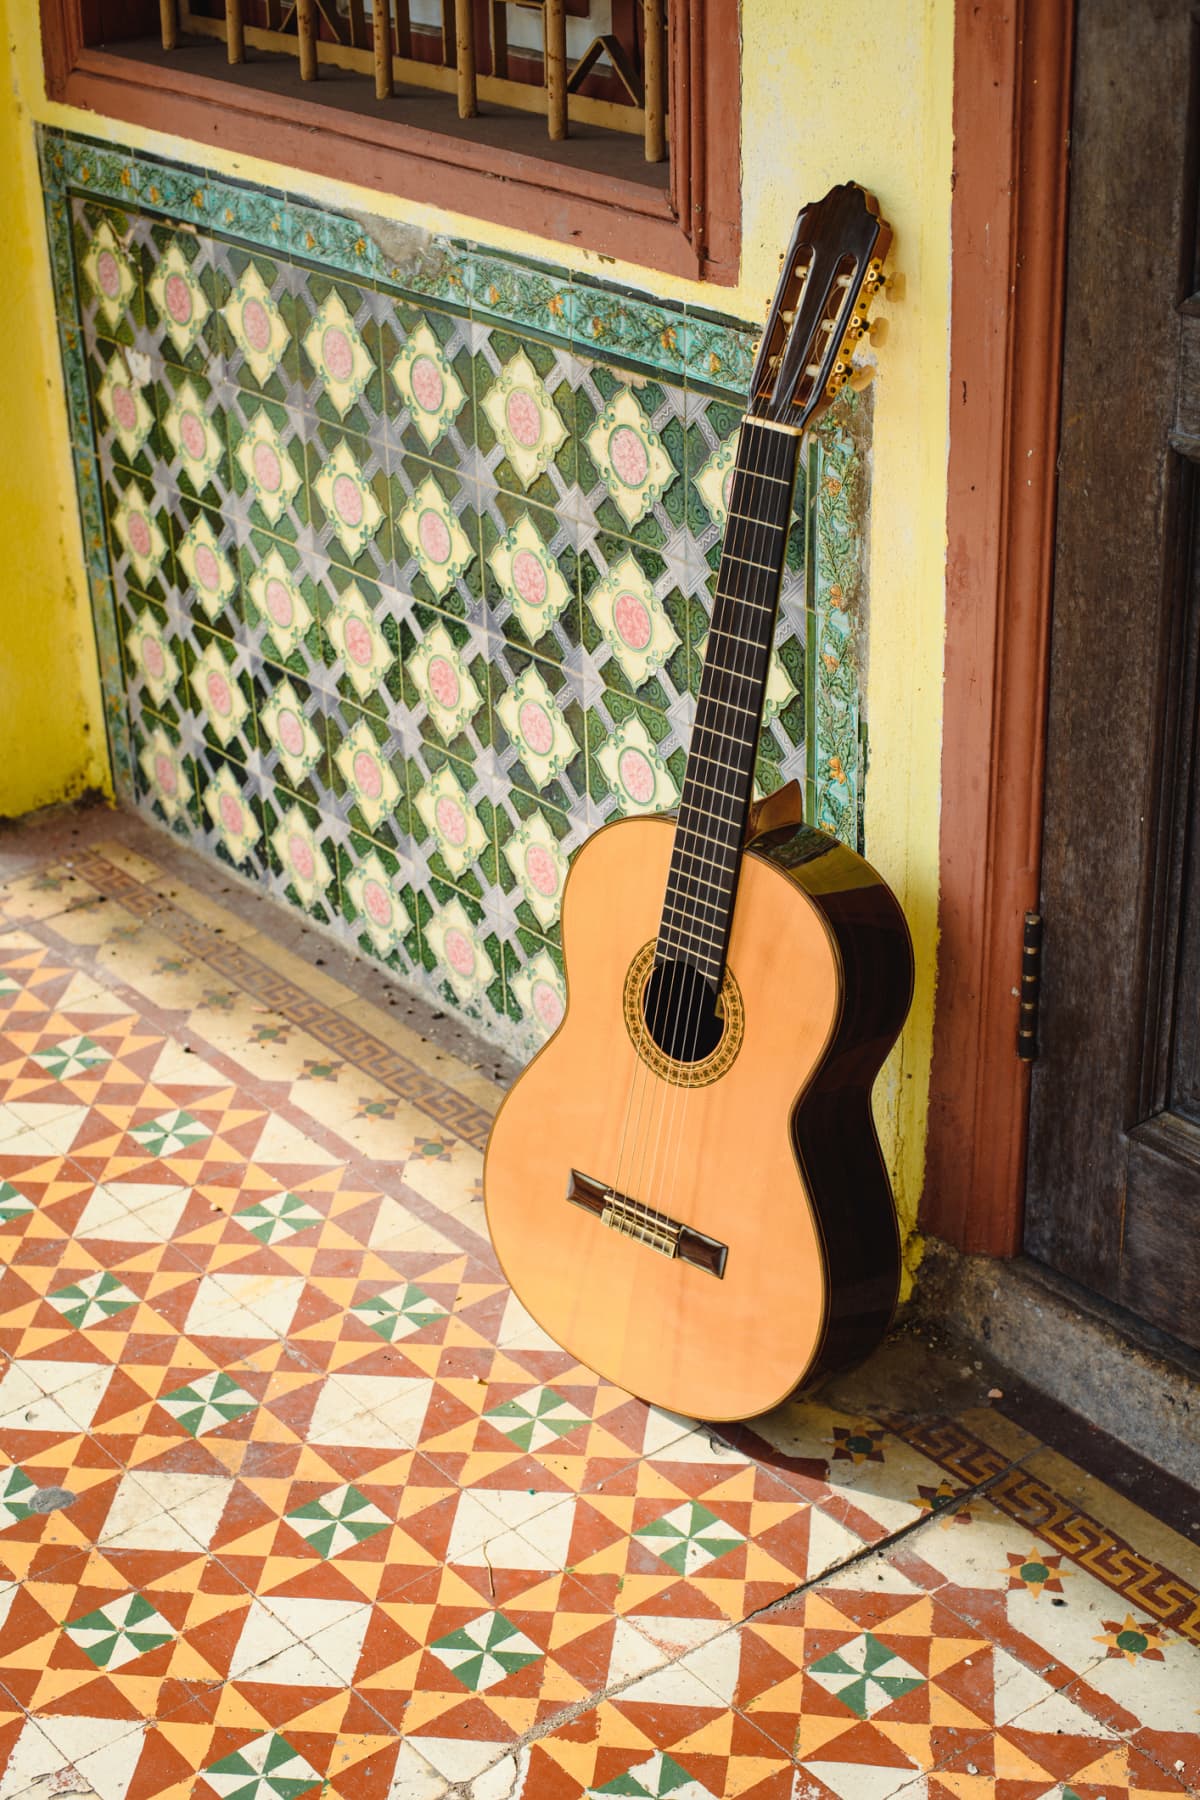 Spanish tiles on floor and wall with guitar